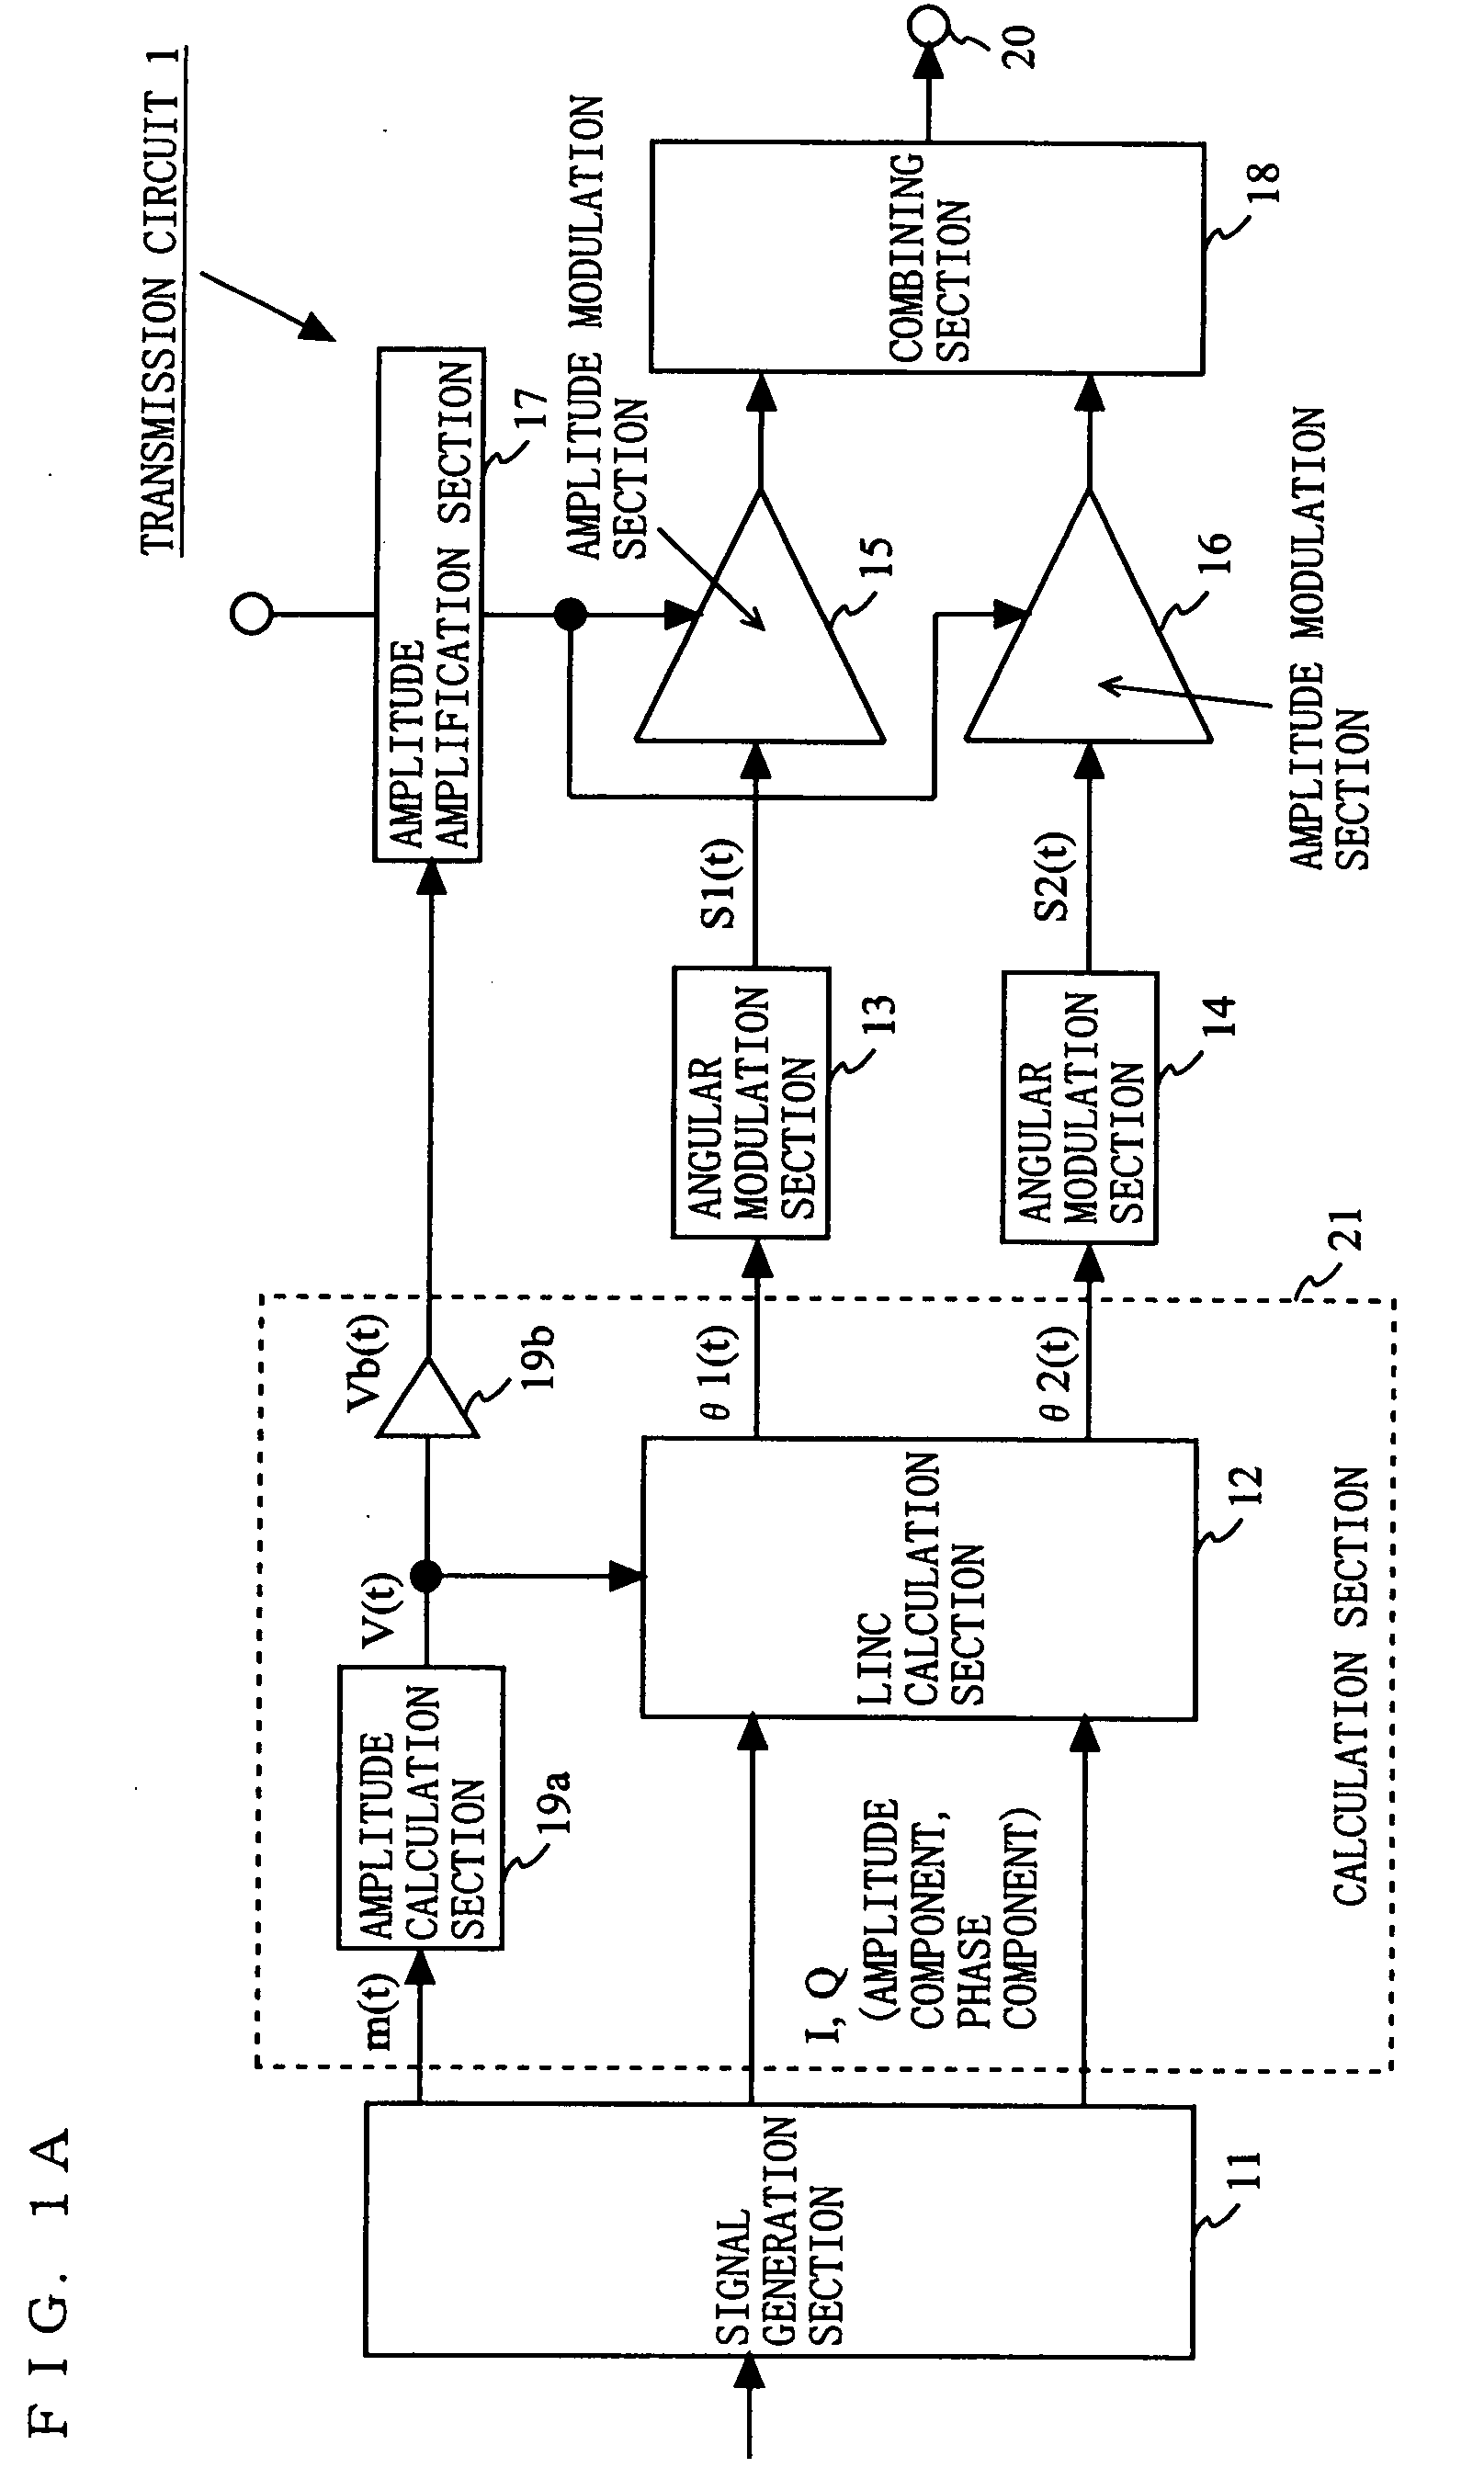 Transmission circuit, and communication apparatus using the same